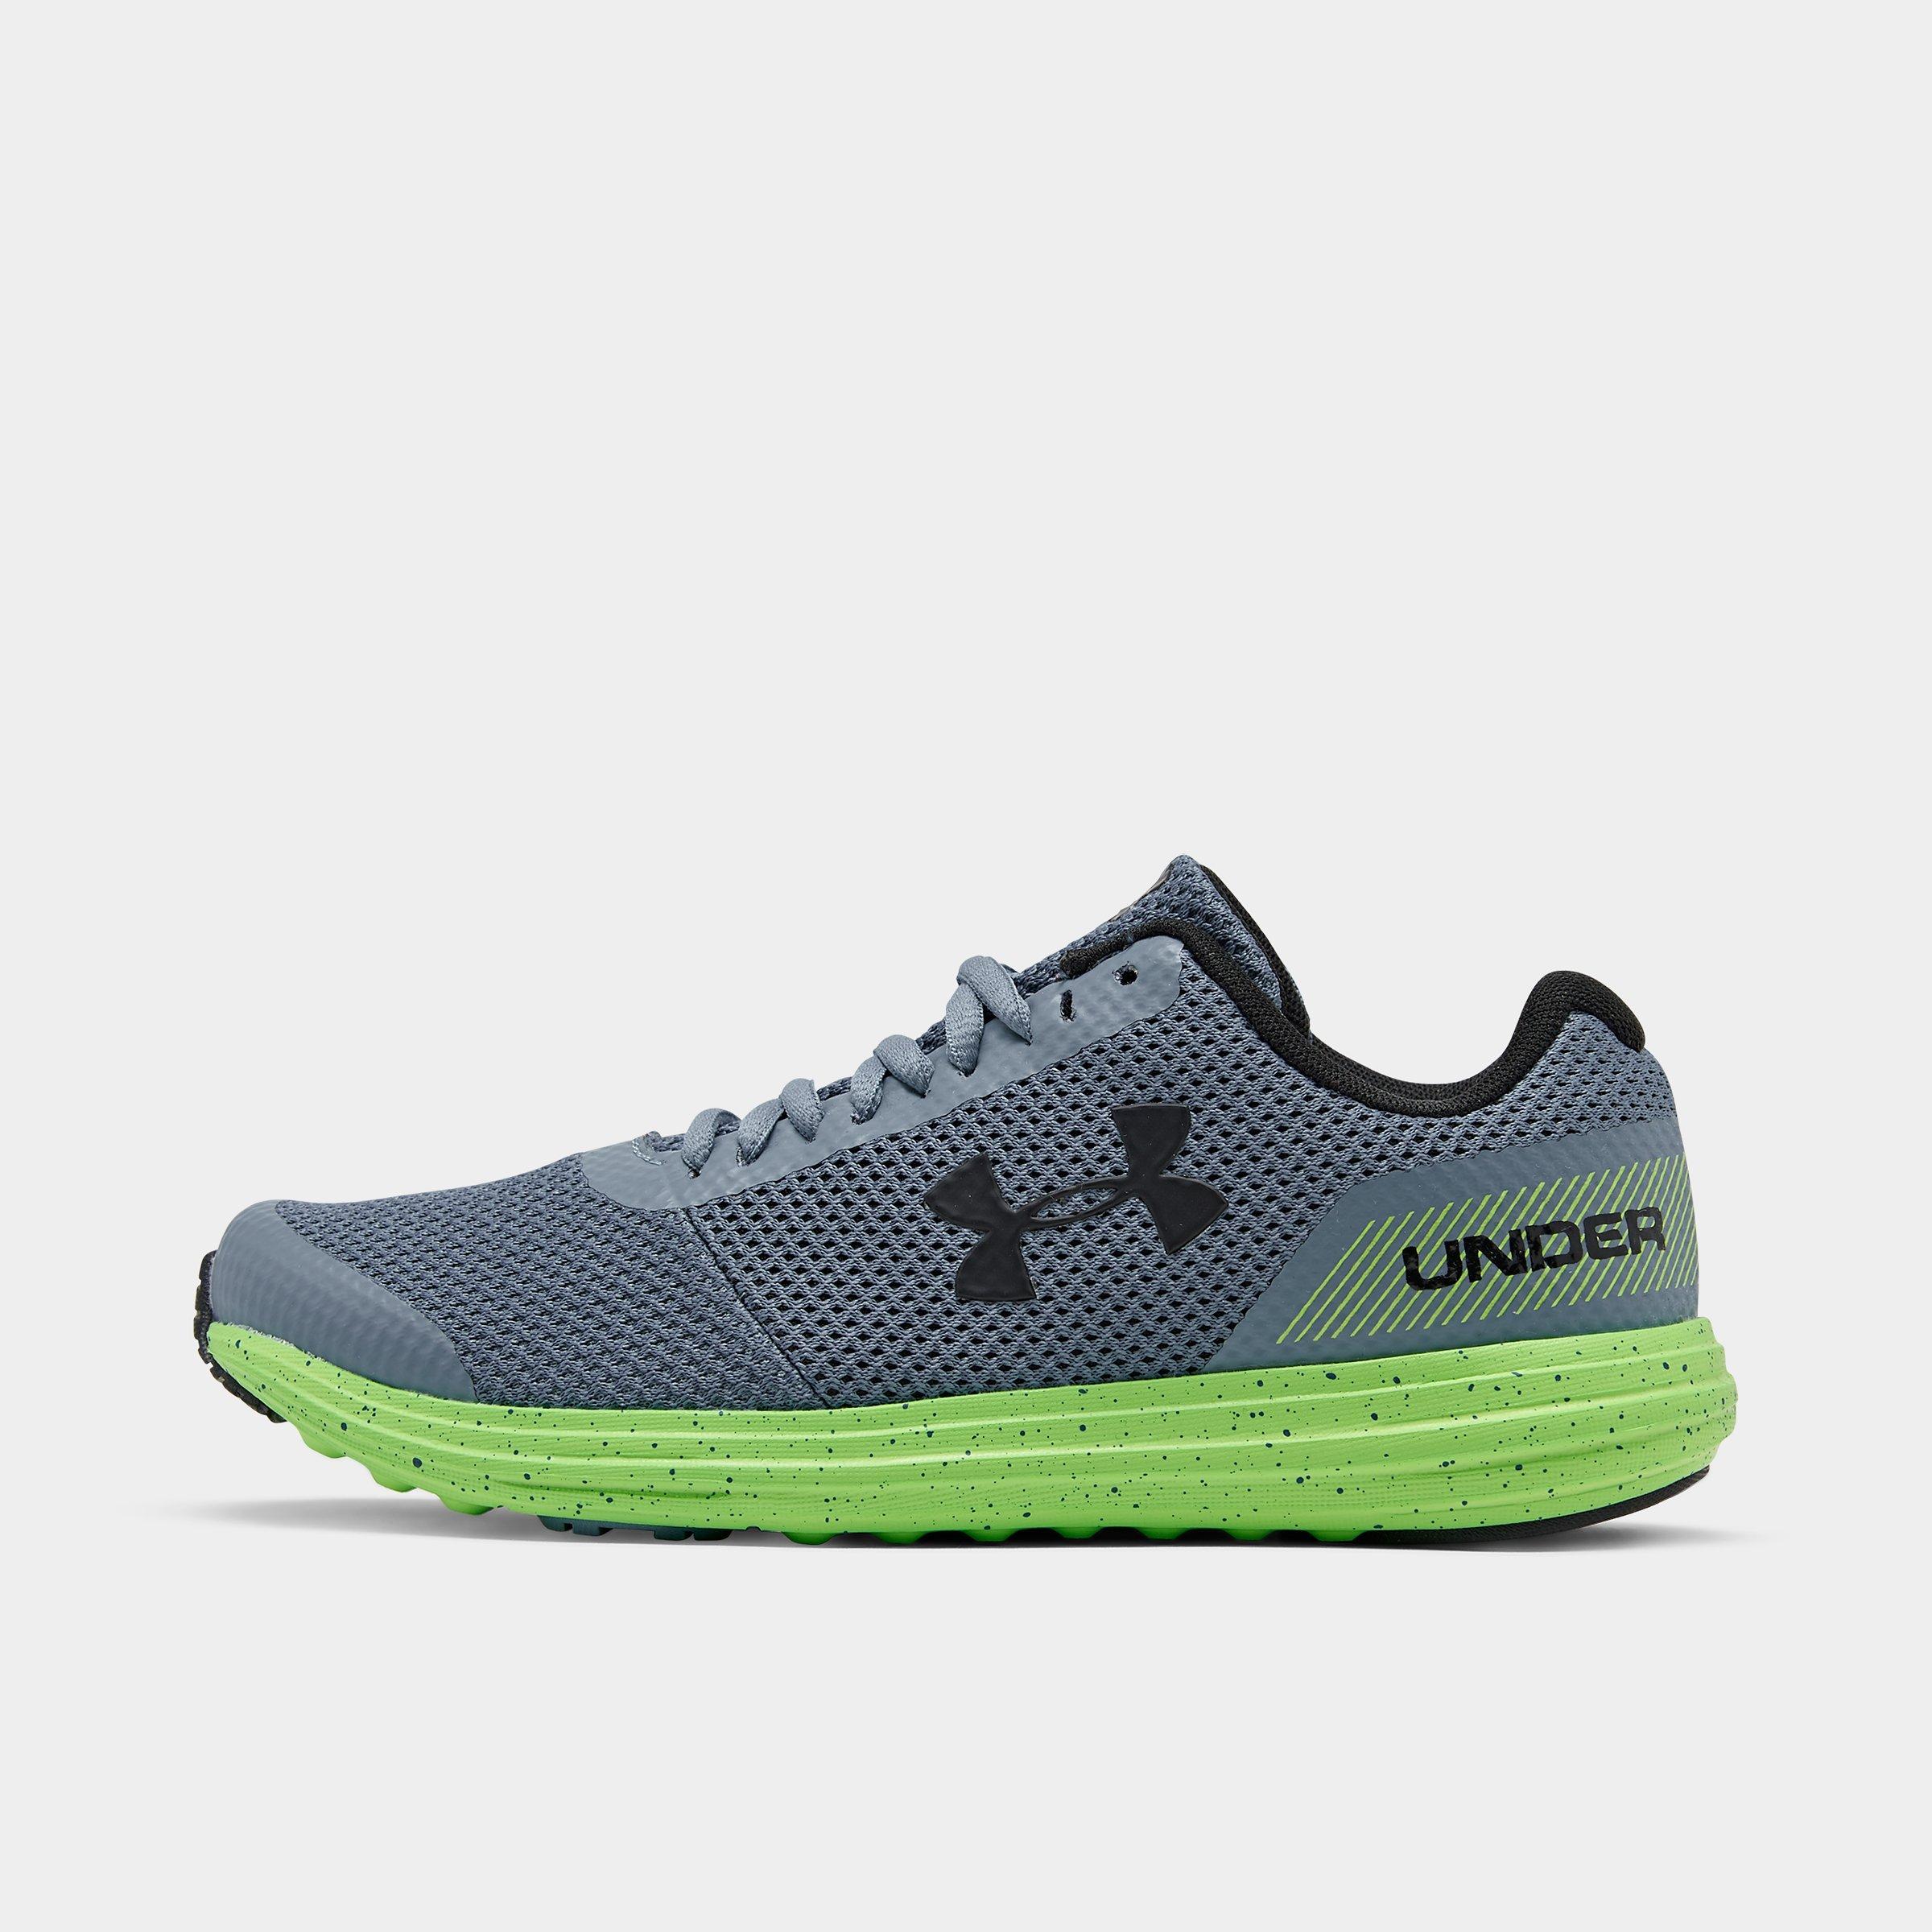 Under Armour Surge Running Shoes 